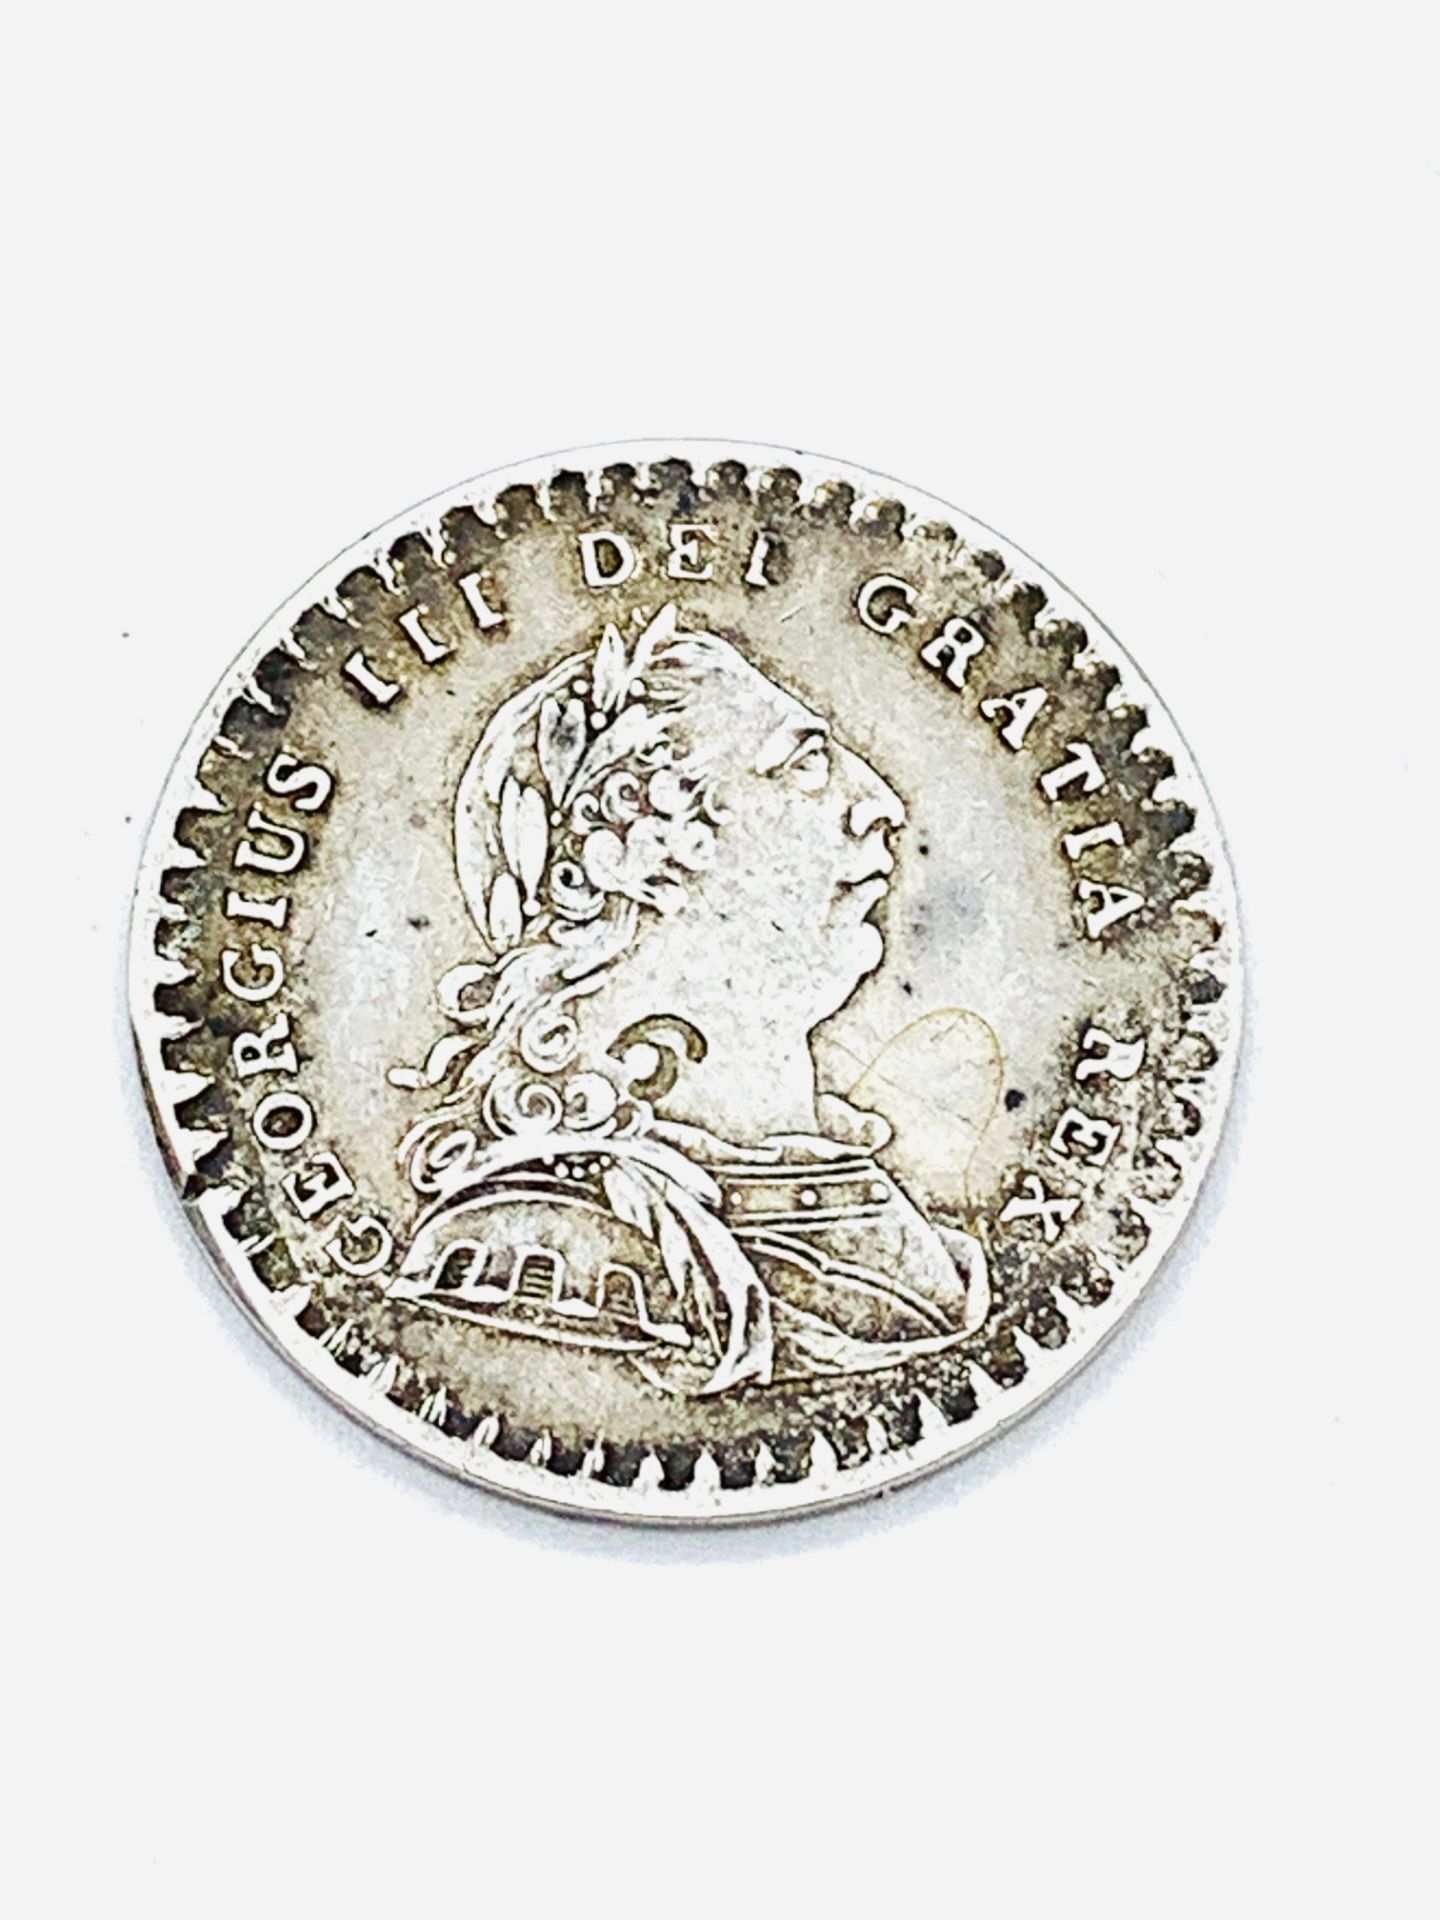 George III silver Bank Token for 1 shilling and 6 pence